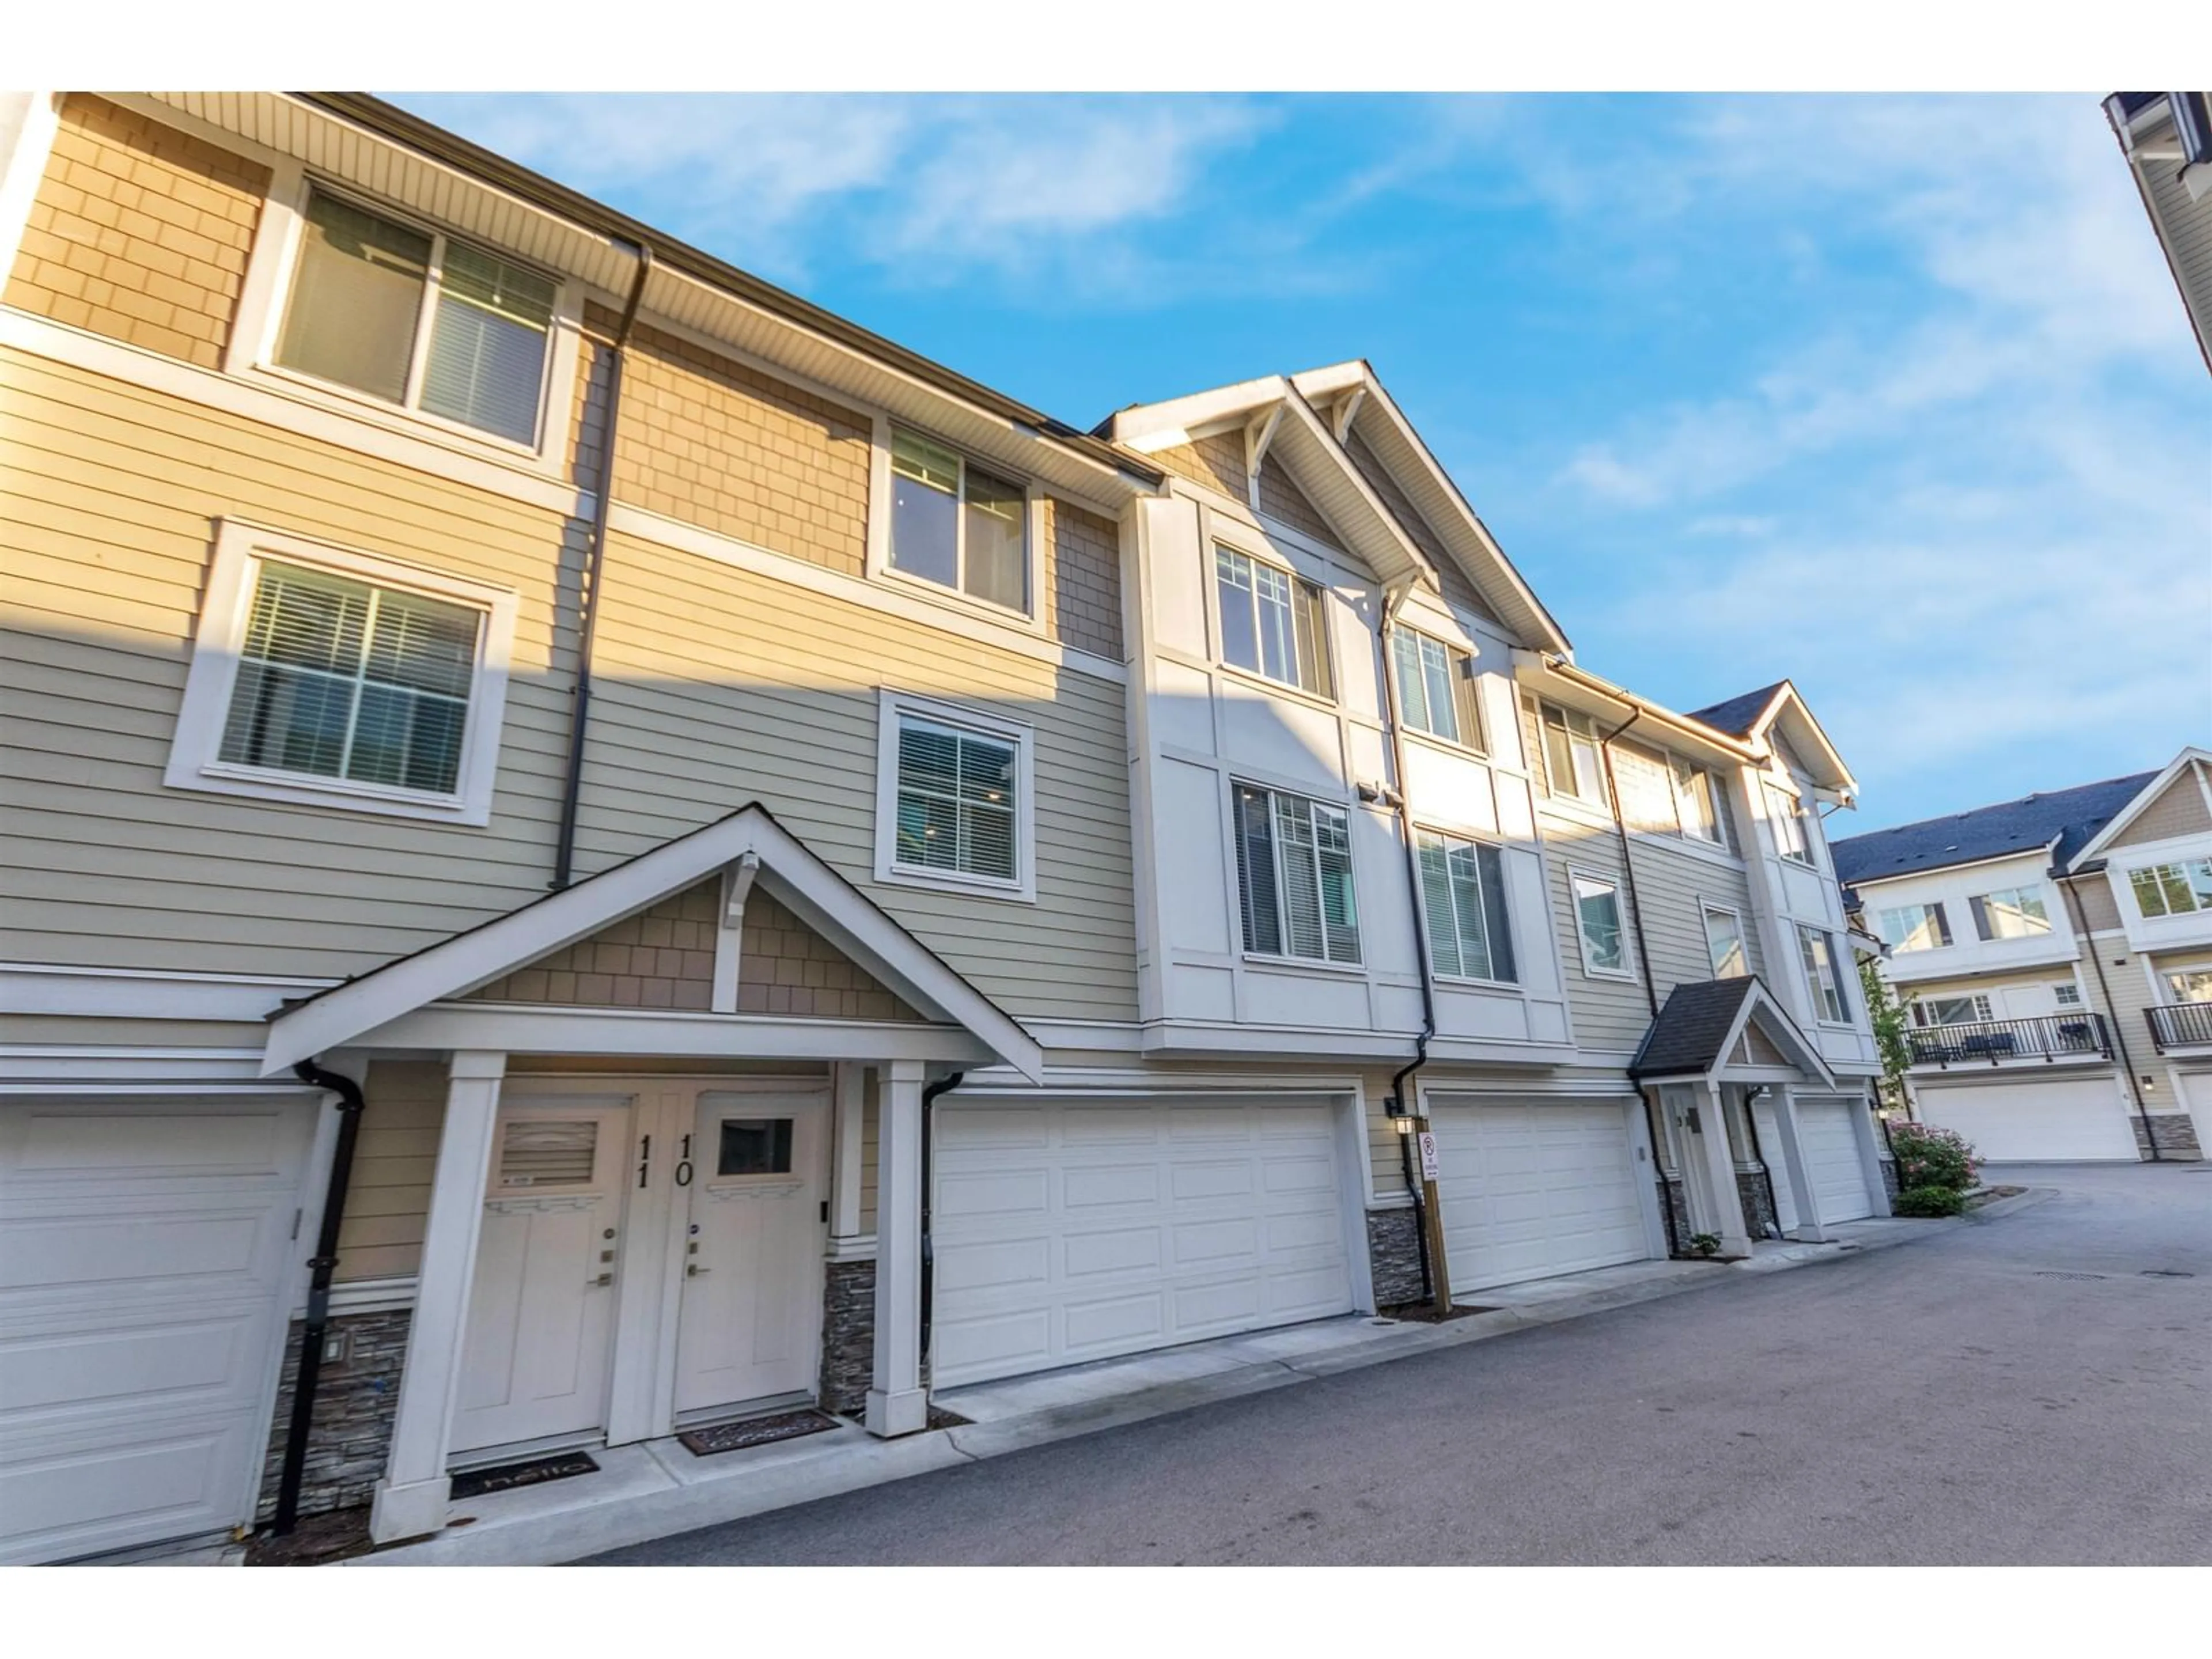 A pic from exterior of the house or condo for 10 7056 192 STREET, Surrey British Columbia V4N6S6